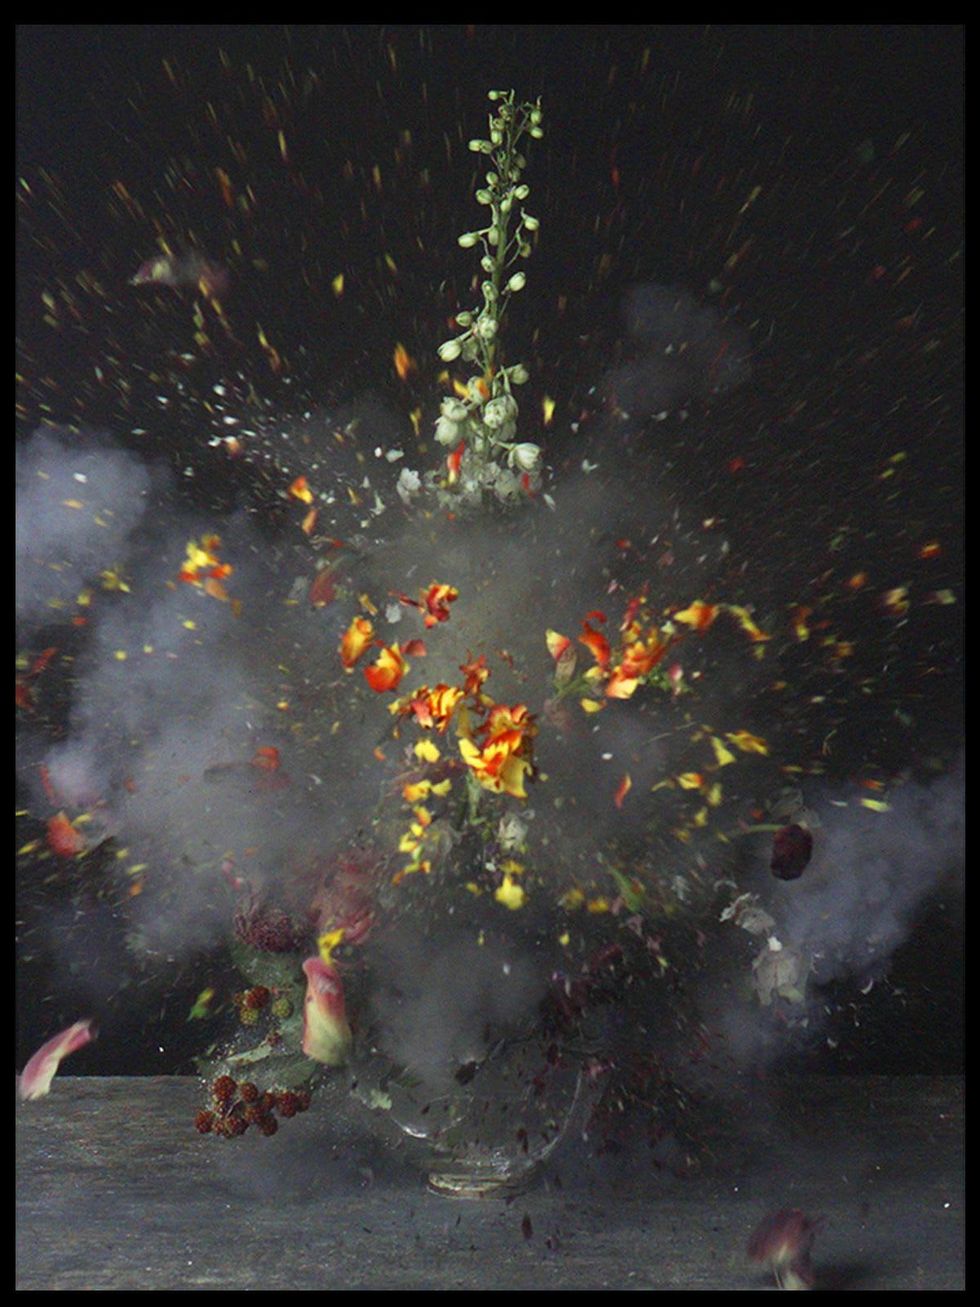 Texas Contemporary Art Fair, show artwork, October 2012, Ori Gersht - Time after Time, Untitled 23, BLACK SPACE